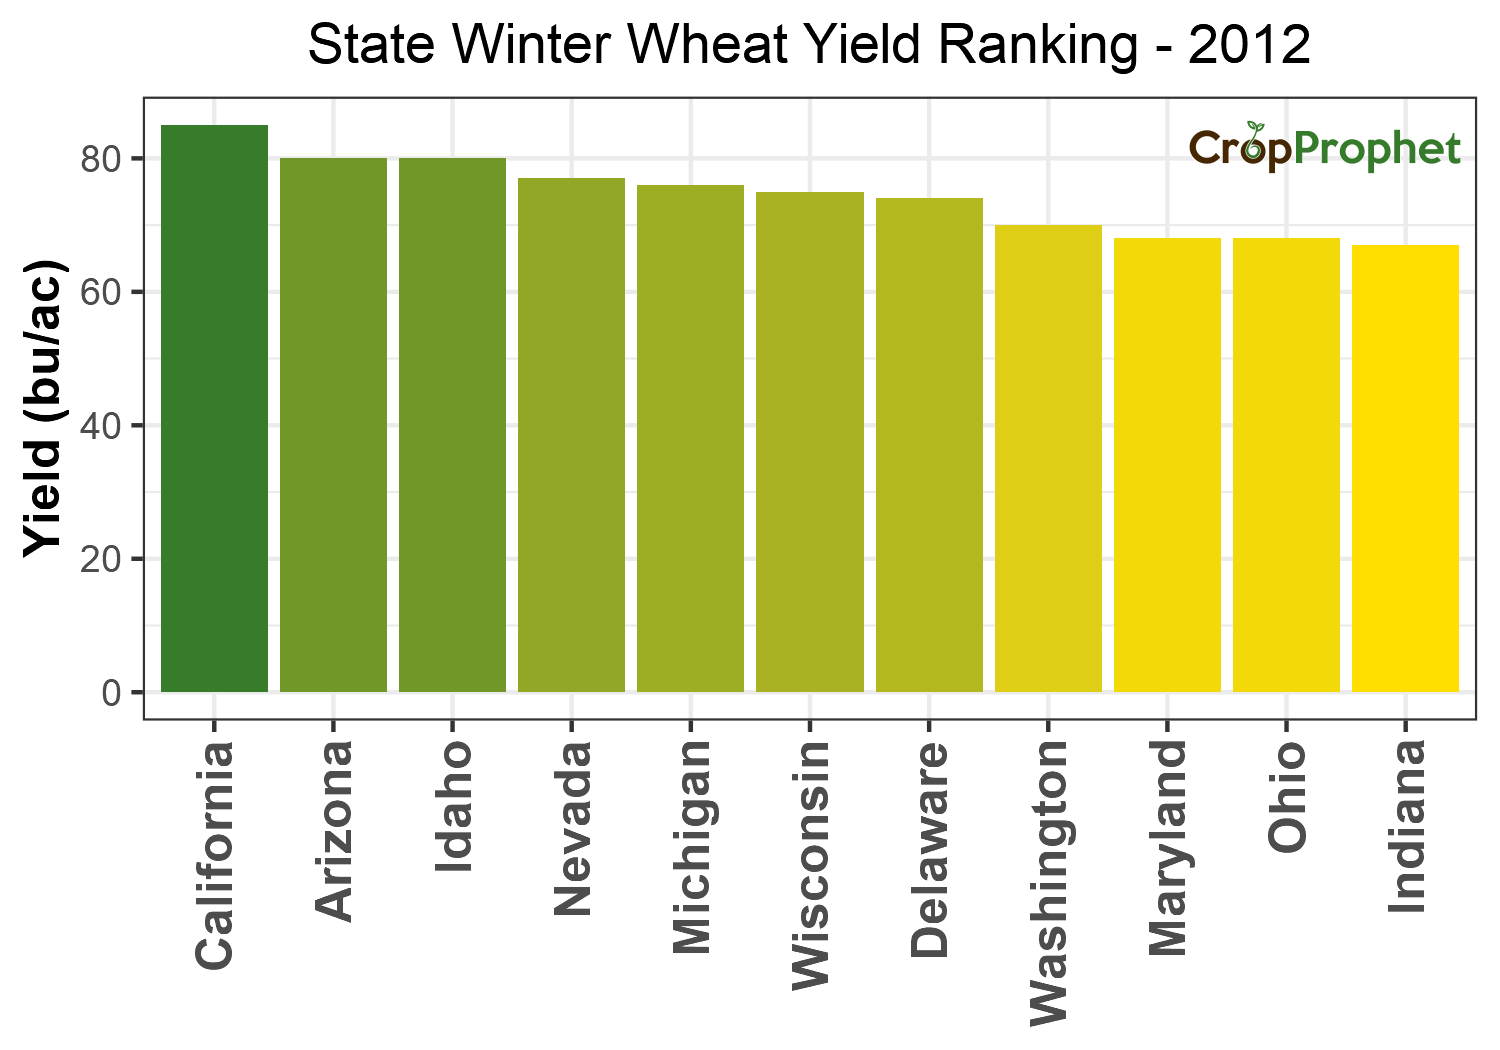 Winter wheat Production by State - 2012 Rankings